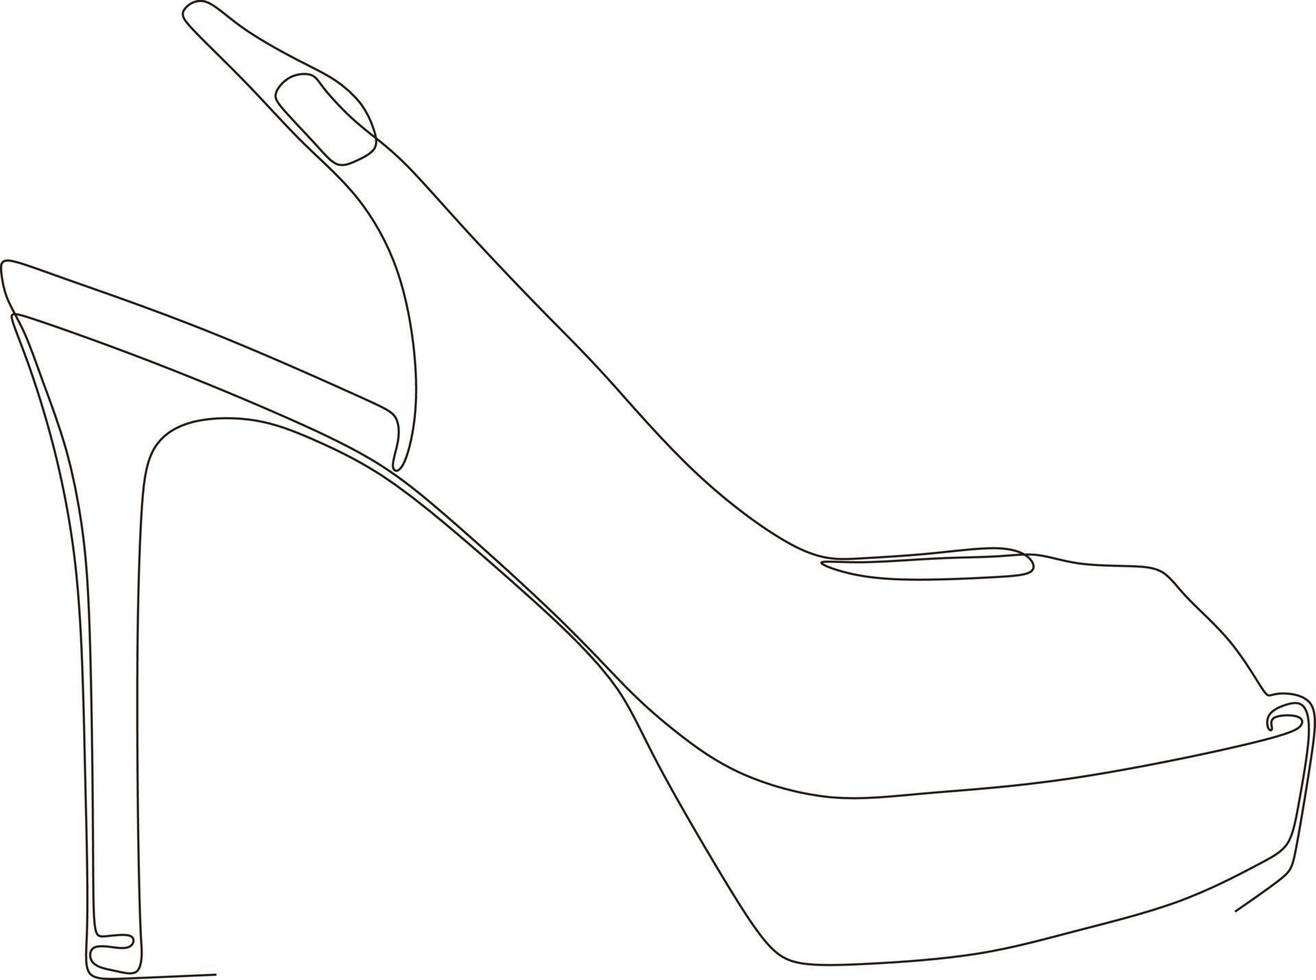 continuous line art drawing of women's sandals with high heels in black and white vector